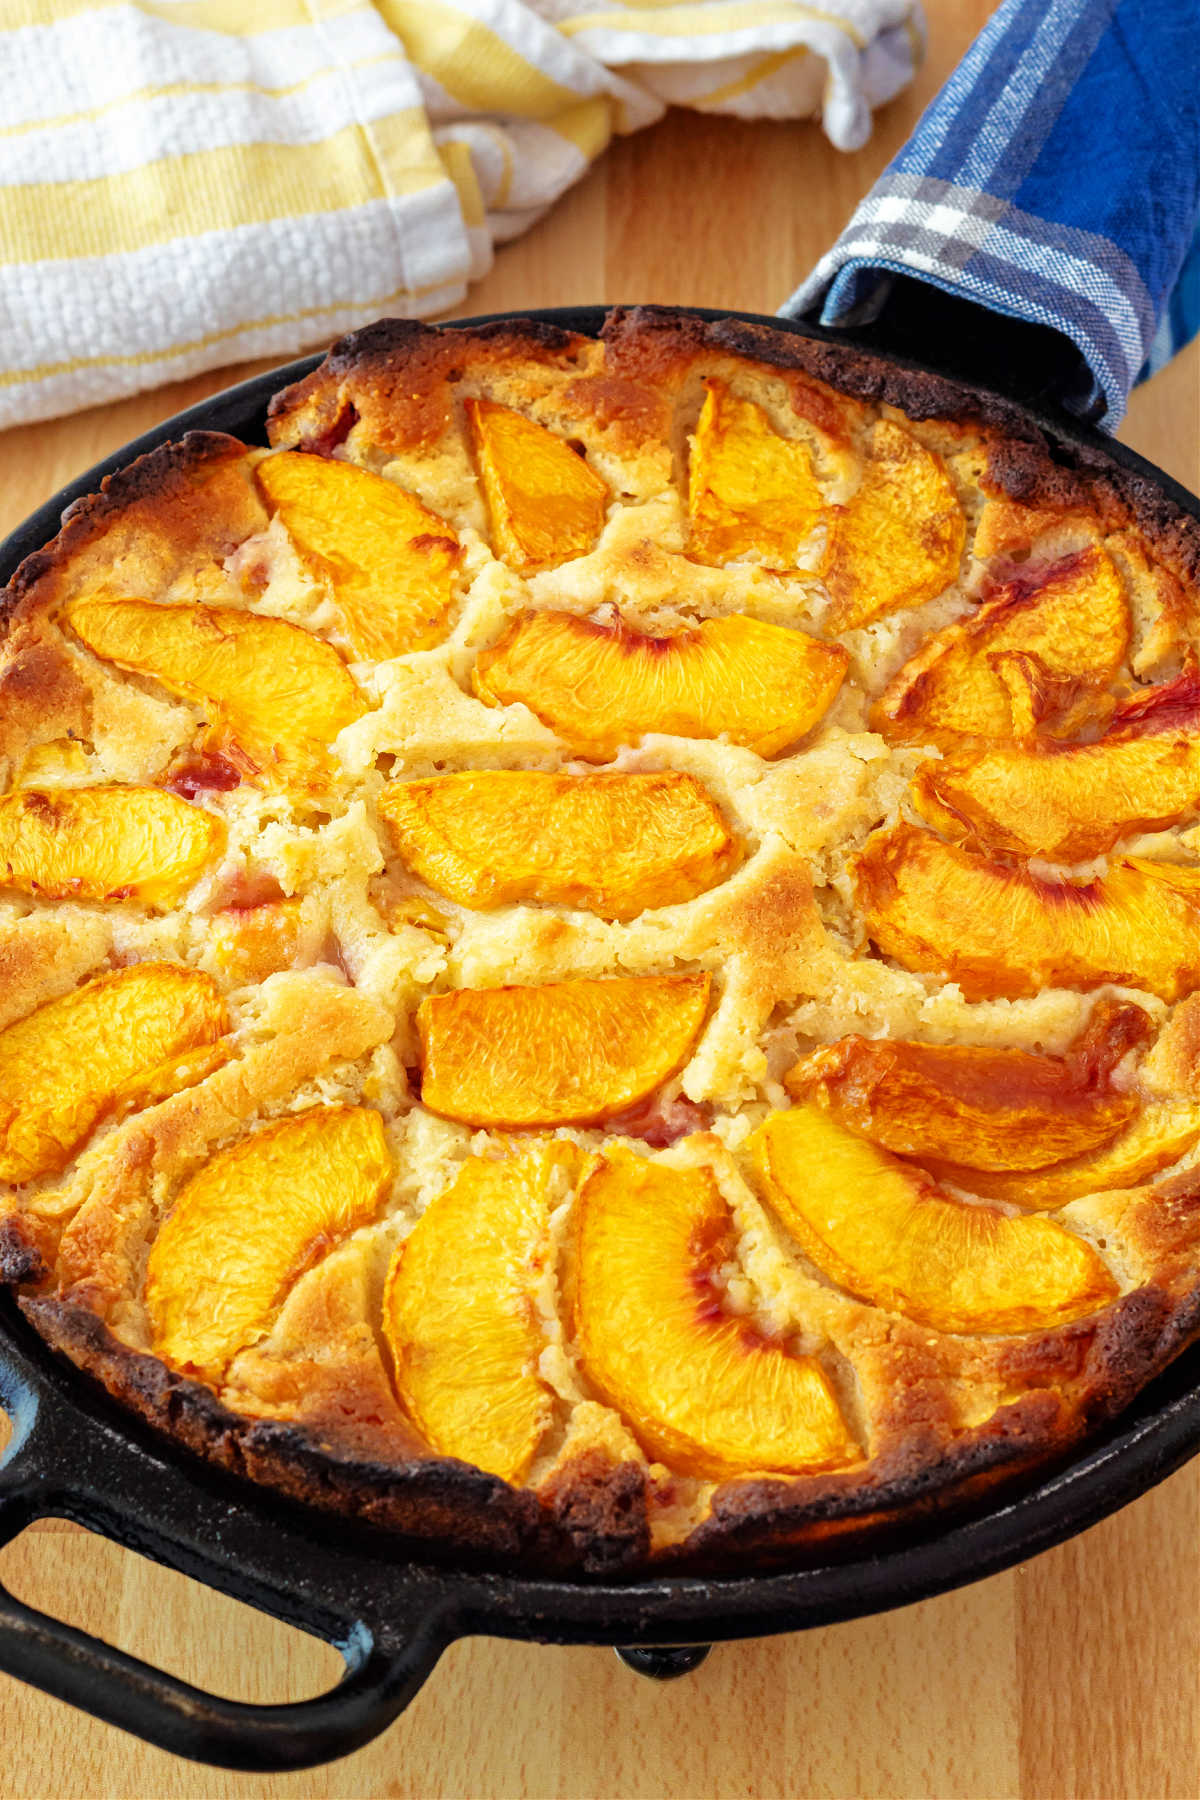 A close-up of a peach breakfast cake topped with sliced peaches in a cast iron skillet.